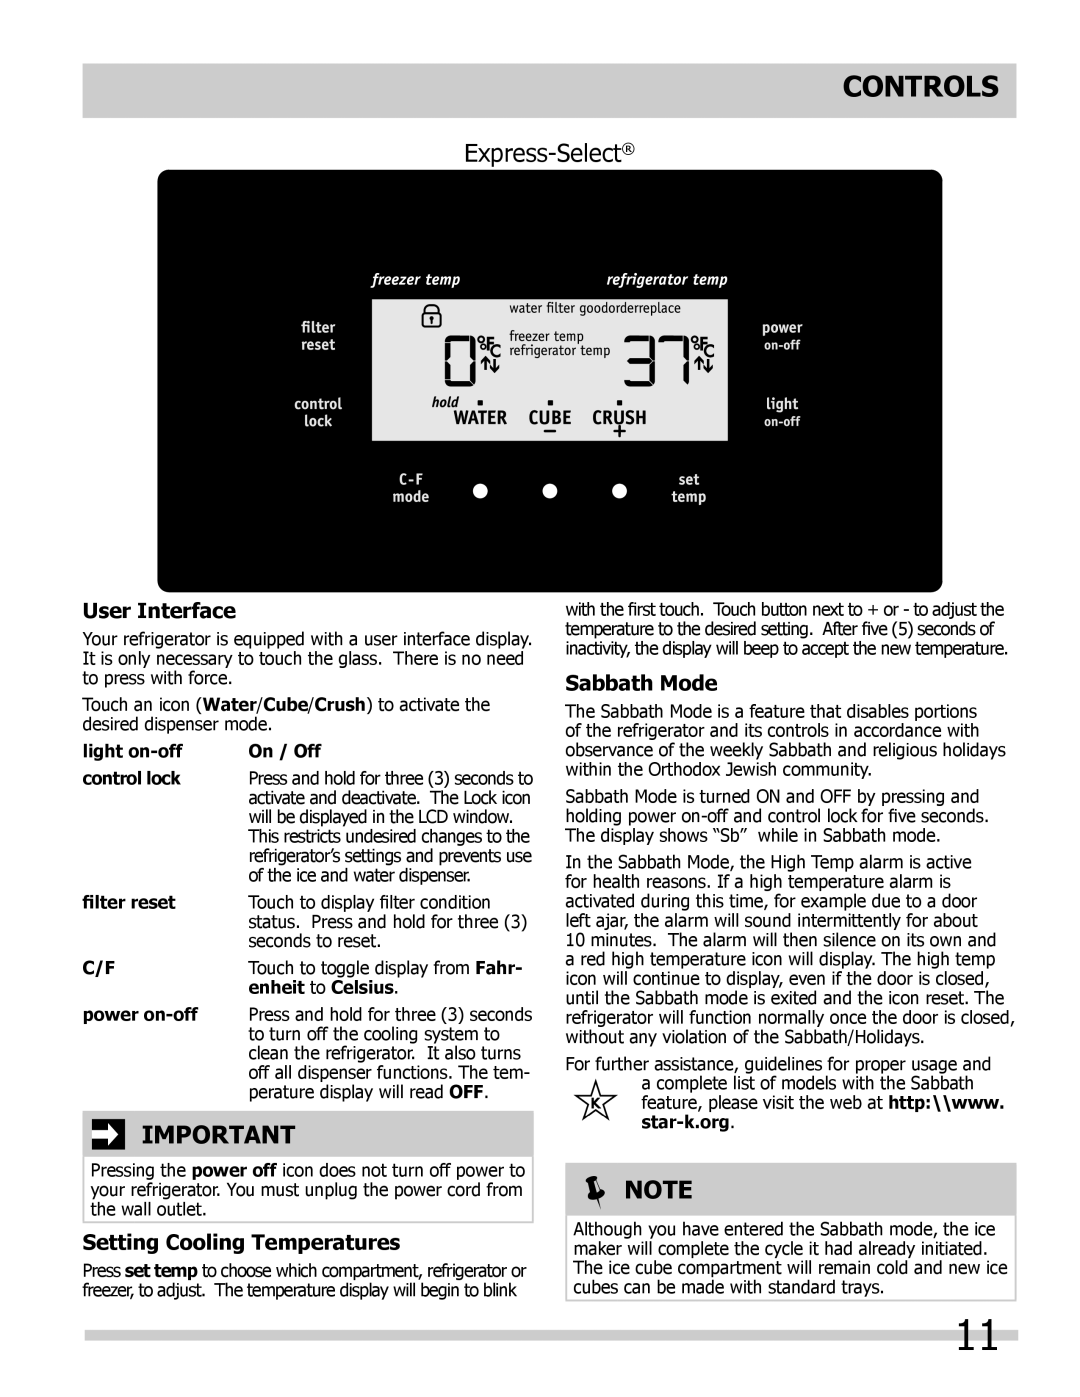 Frigidaire FGHS2332LP filter reset, enheit to Celsius, Controls, Express-Select,  Note, User Interface, Sabbath Mode 